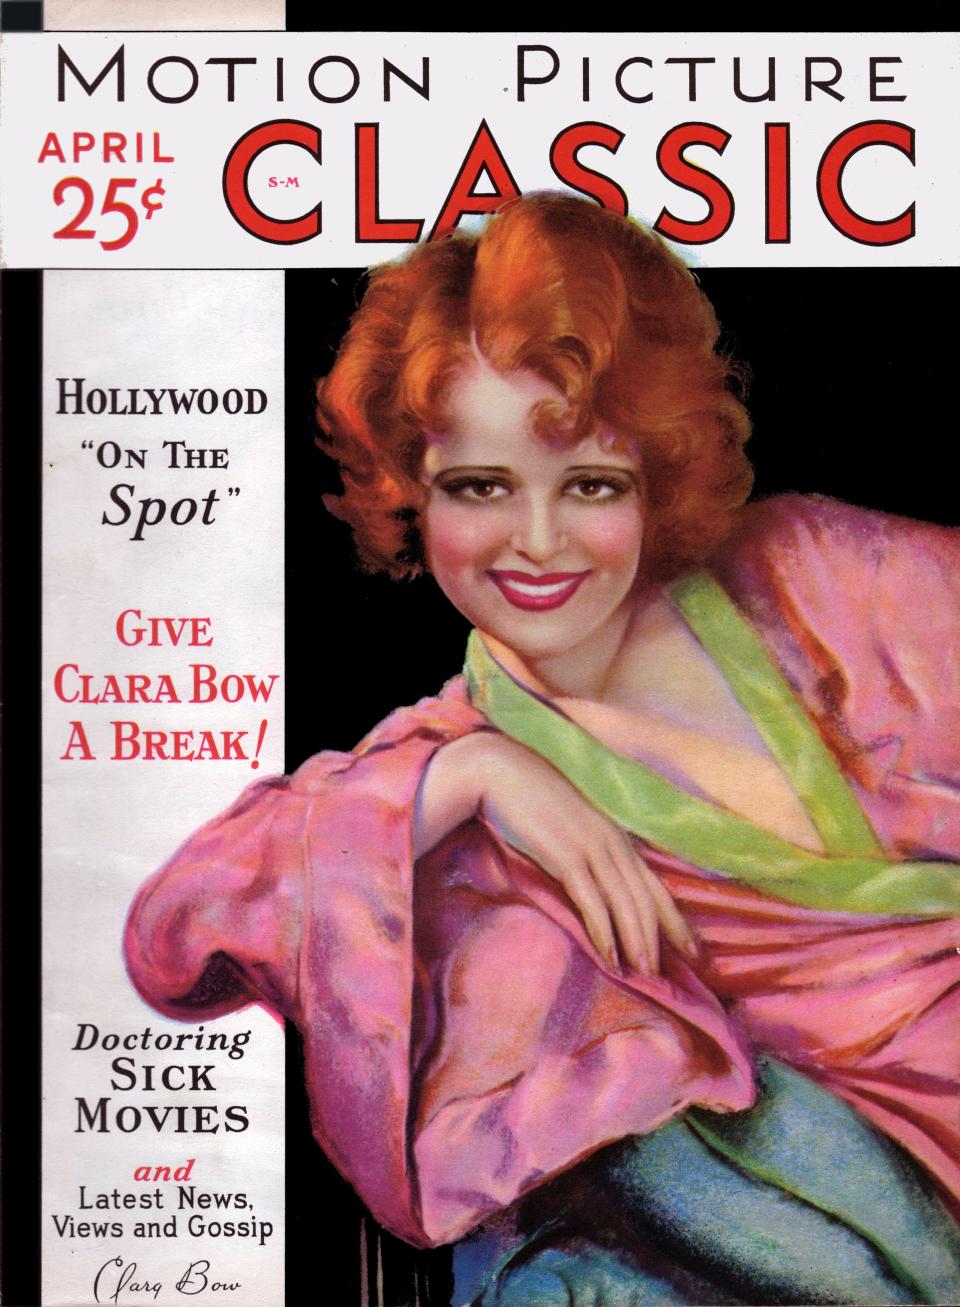 The film actress Clara Bow is the cover girl for Motion Picture Classic magazine, published in Chicago, Illinois in April of 1931. (Photo by Transcendental Graphics/Getty Images)